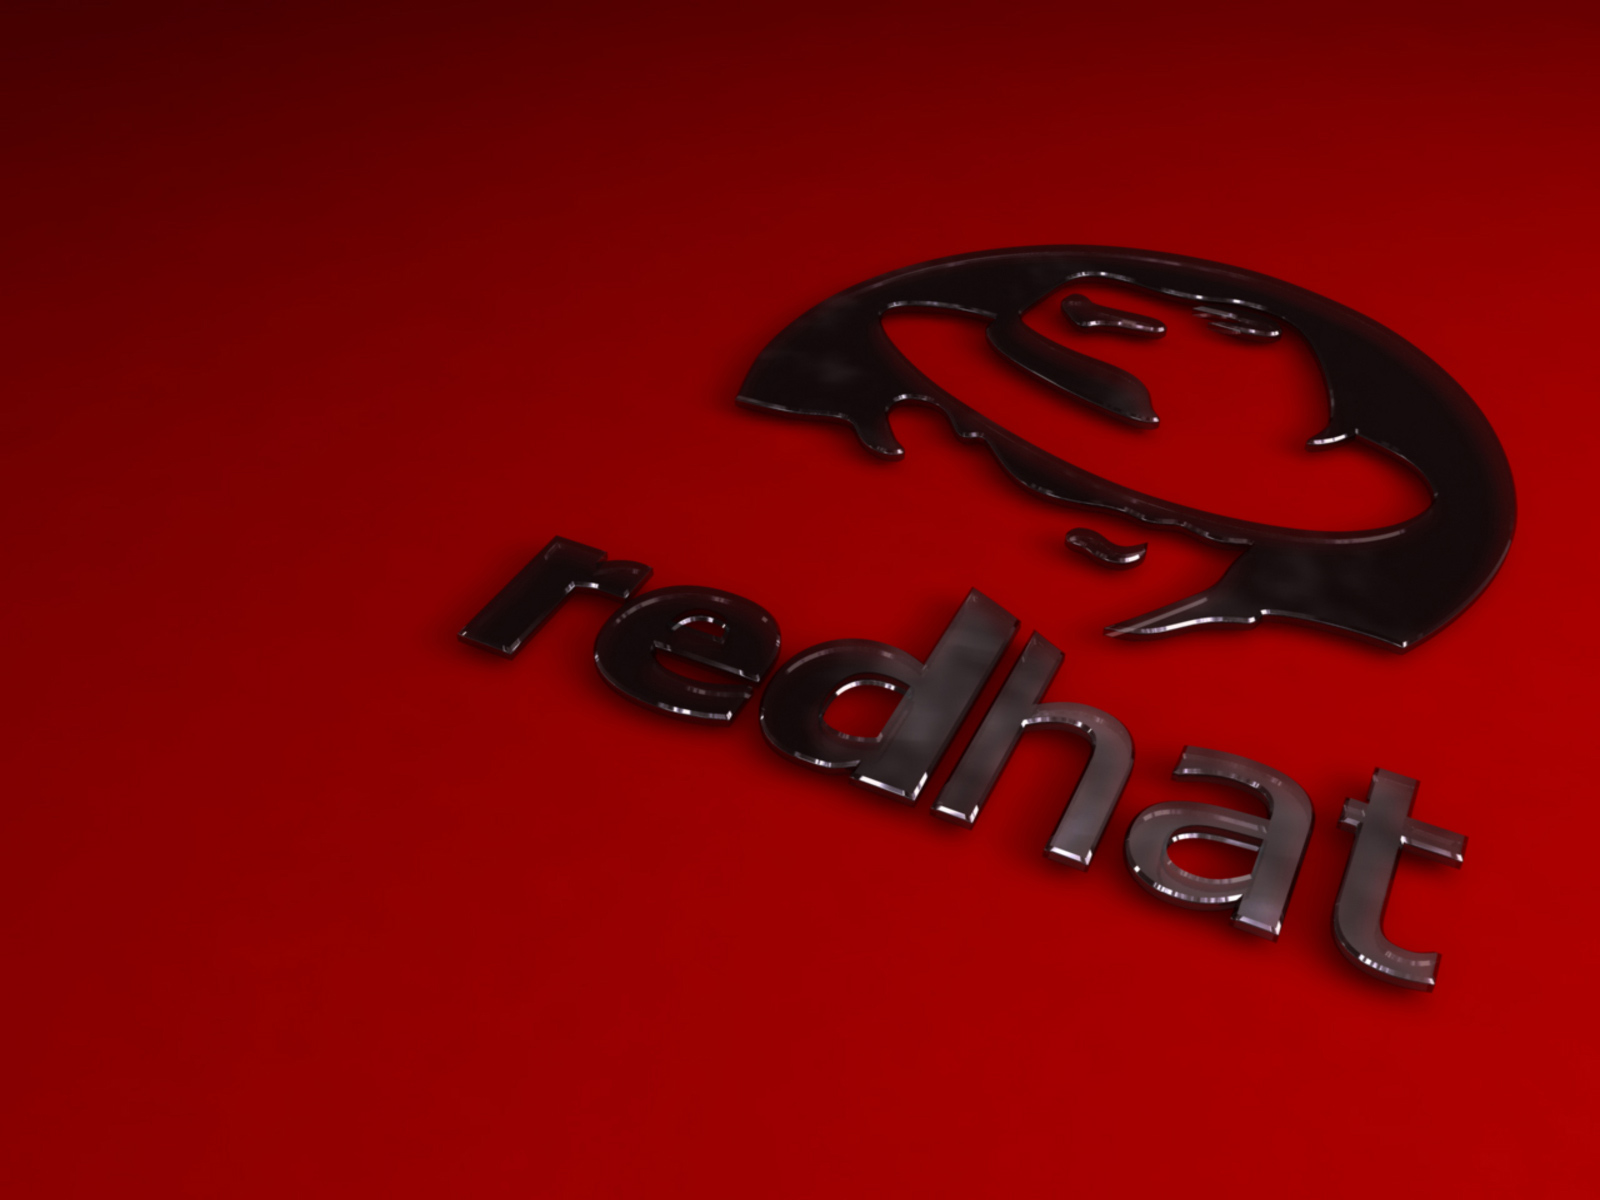 Red Hat HD Logo Embossed In Background Wallpaper